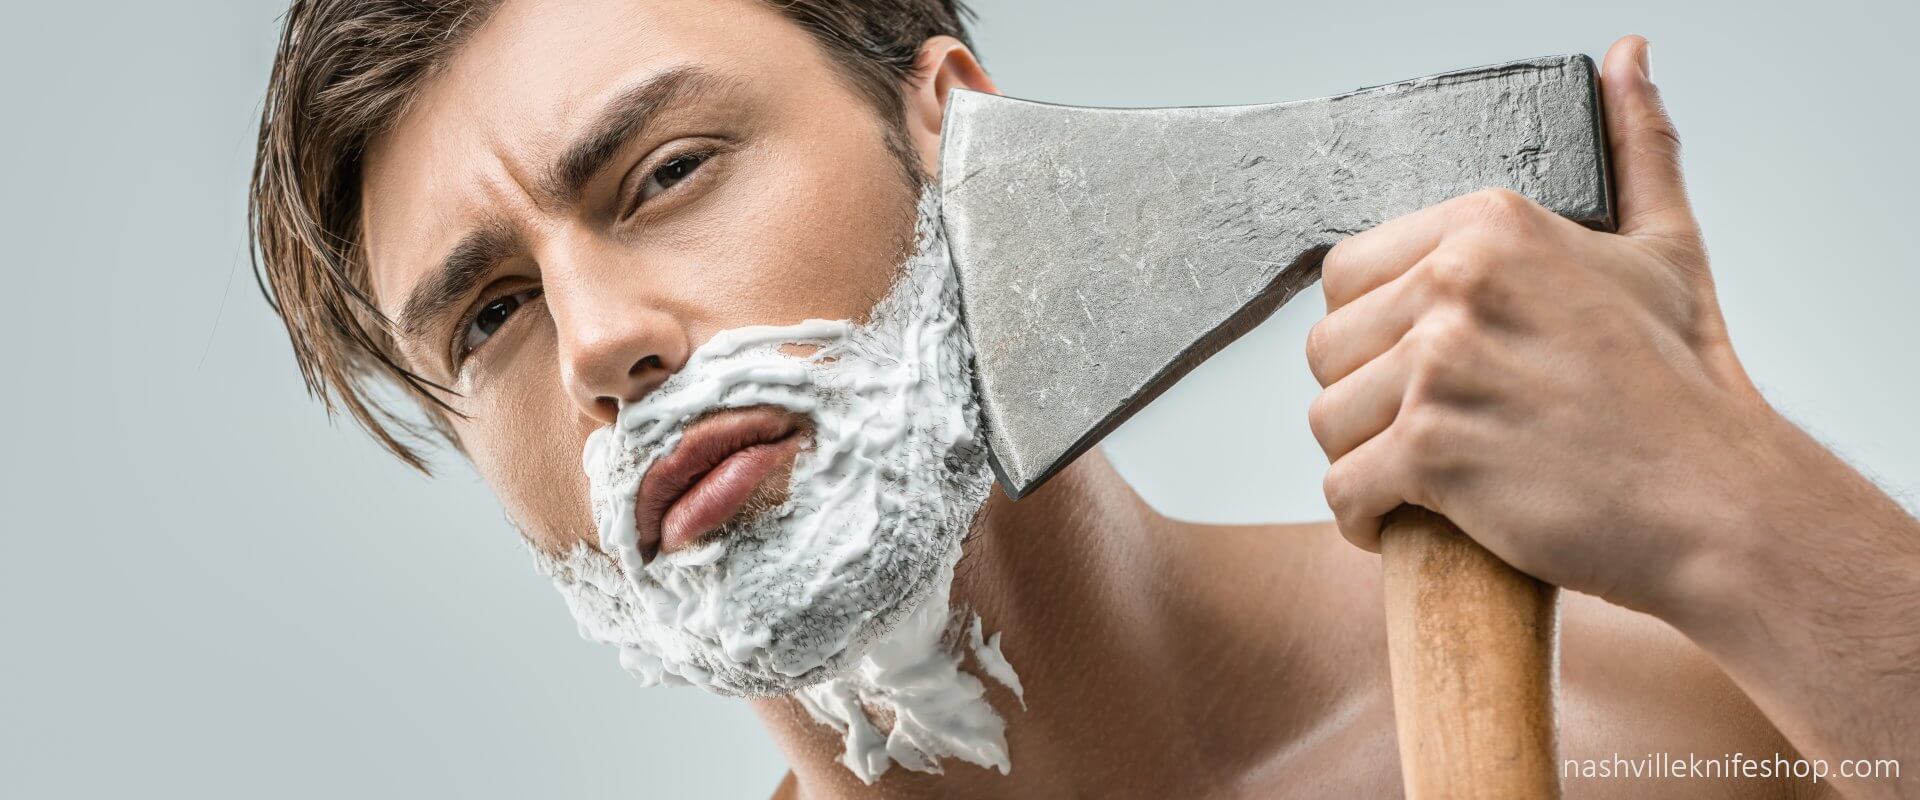 How to shave correctly